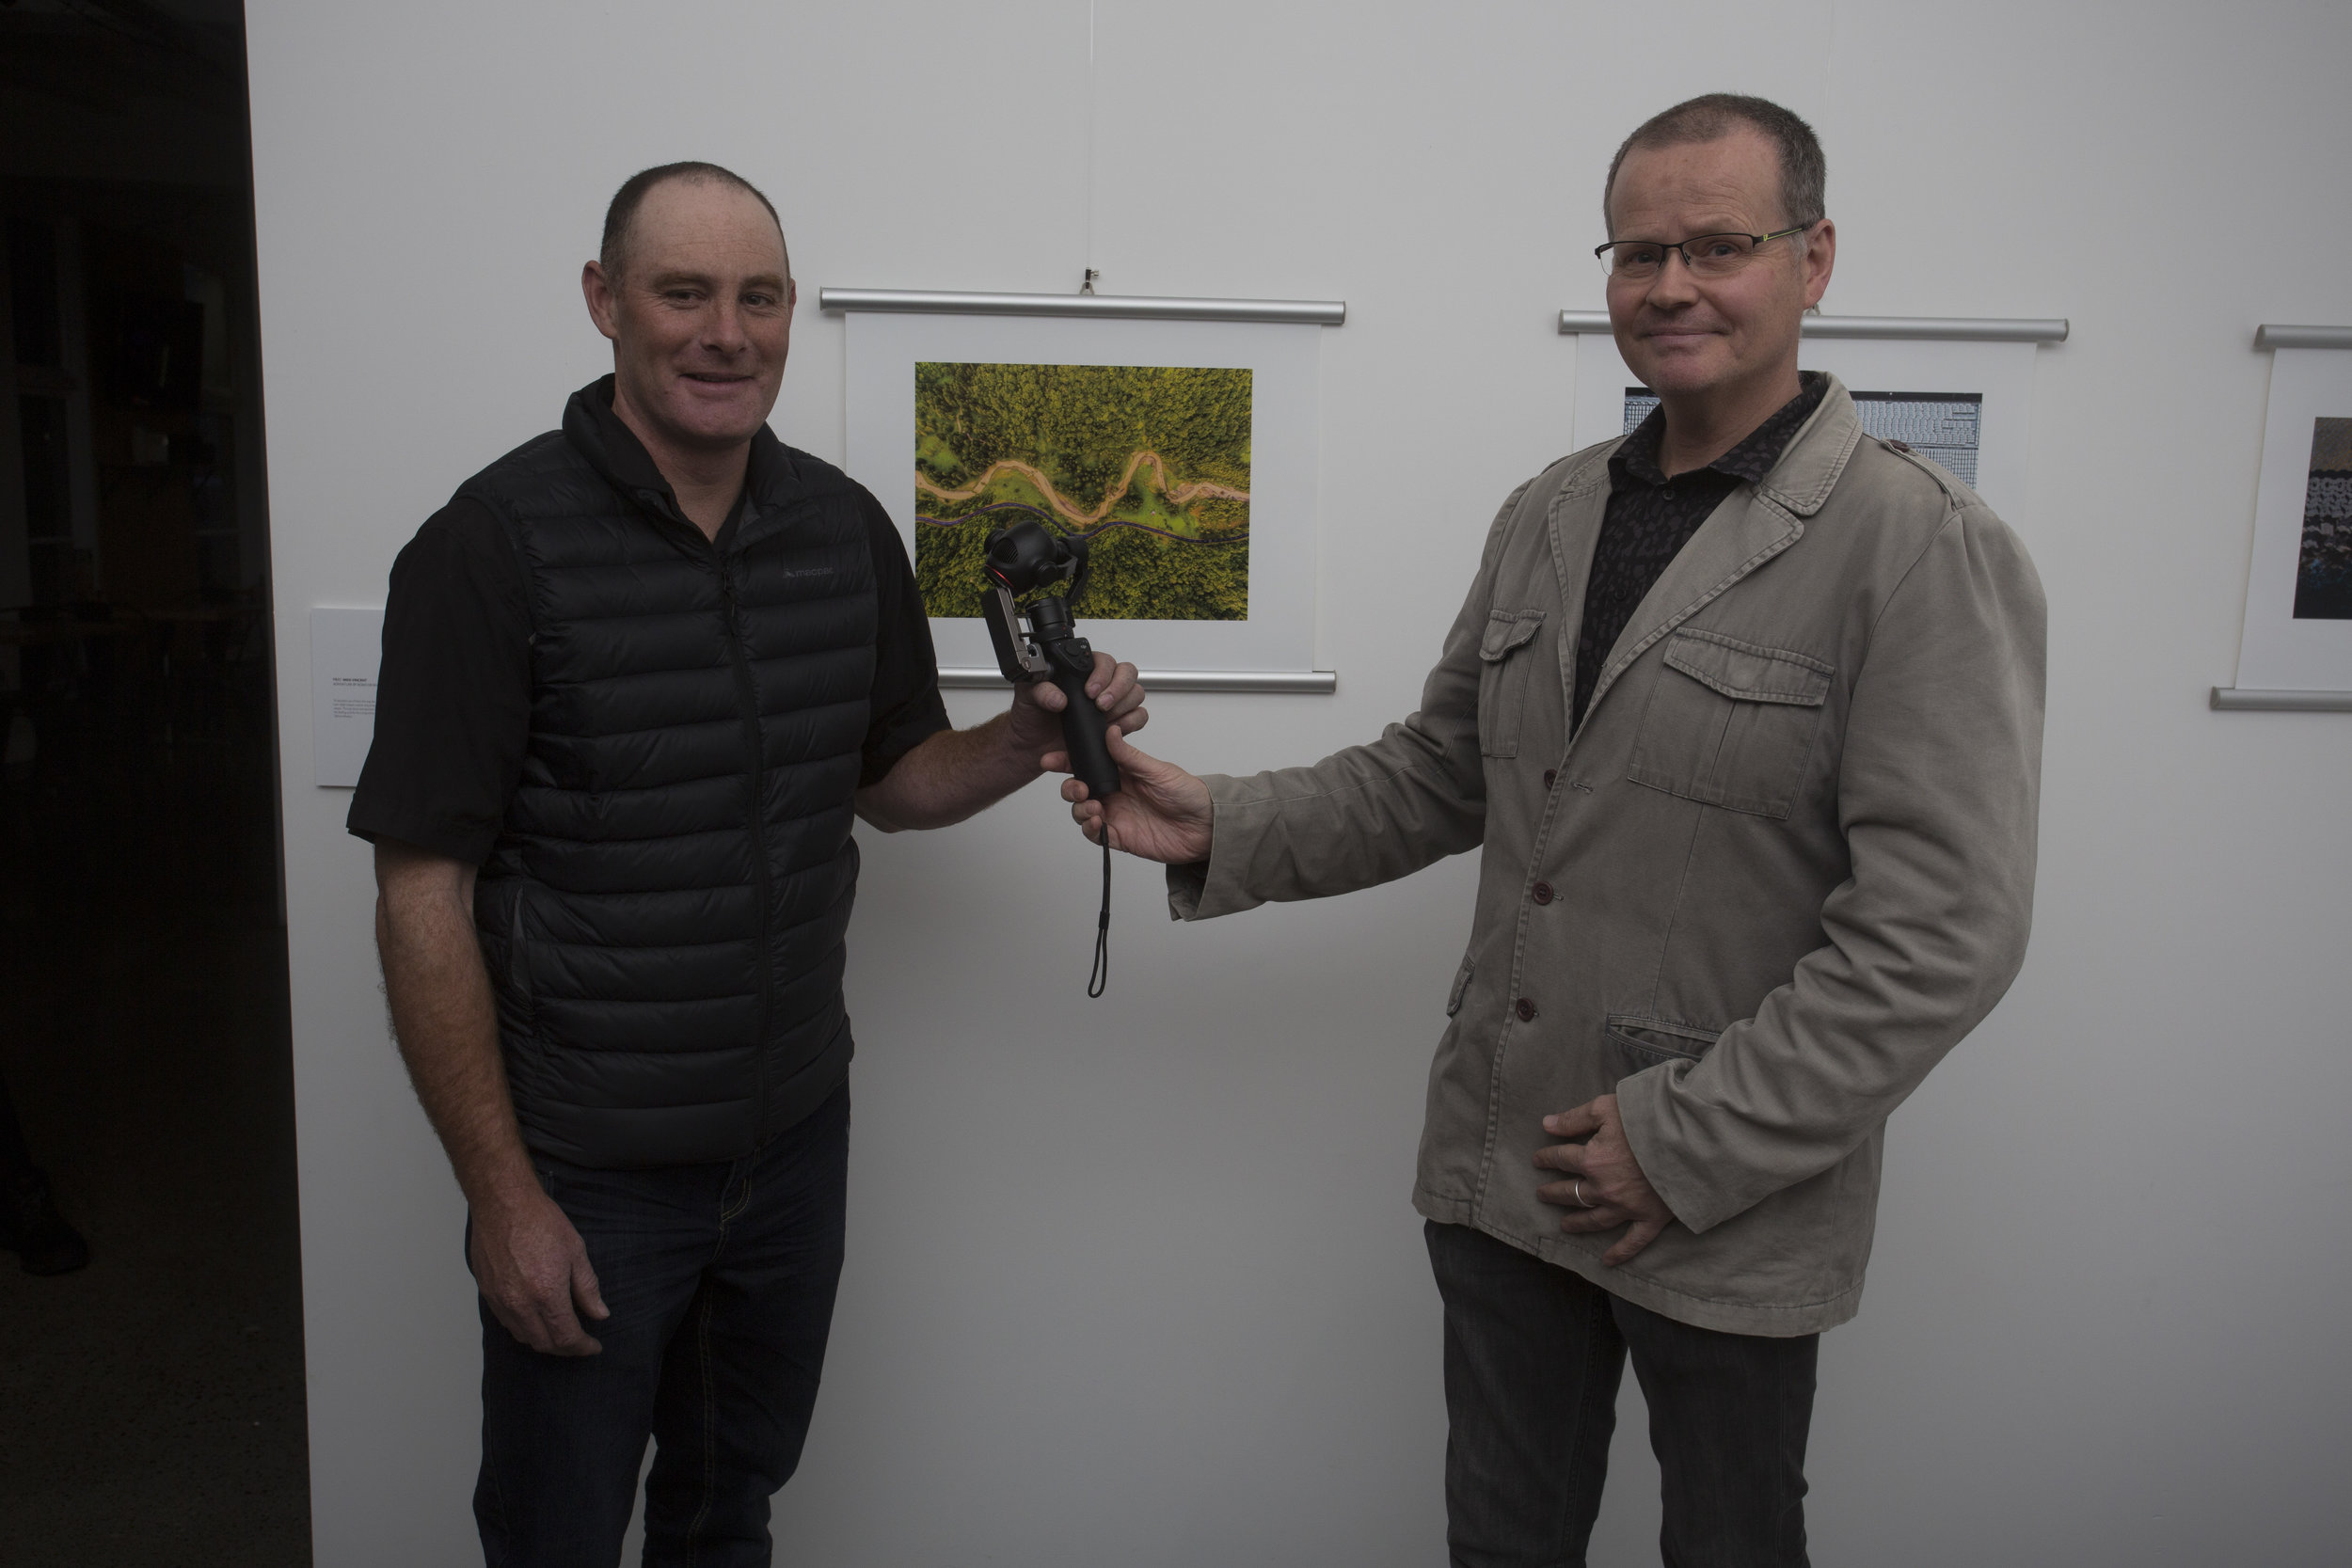  Winner of the Aerial category, Mike Vincent, with Ken Newall of DJI/Lacklands 